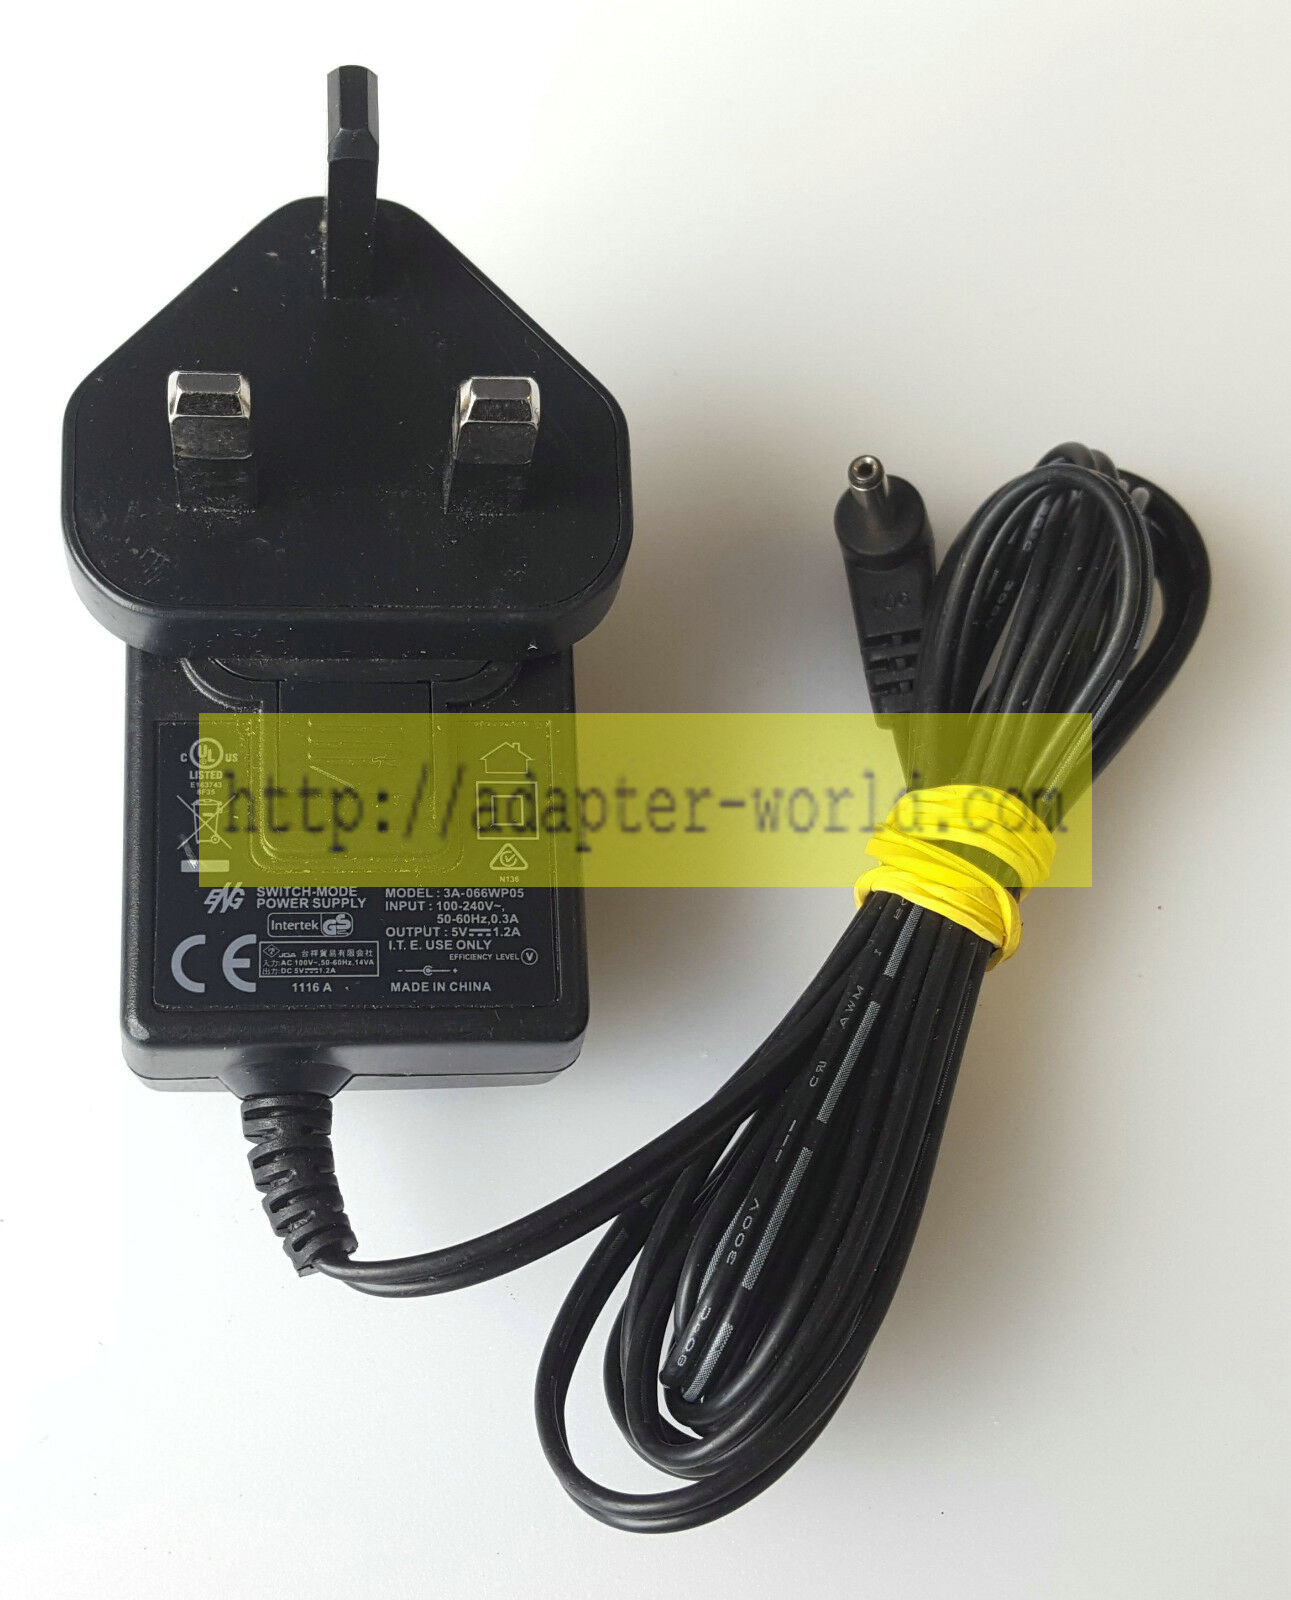 *Brand NEW*ENG 5V 1.2A 3A-066WP05 AC/DC SWITCH-MODE ADAPTER POWER SUPPLY